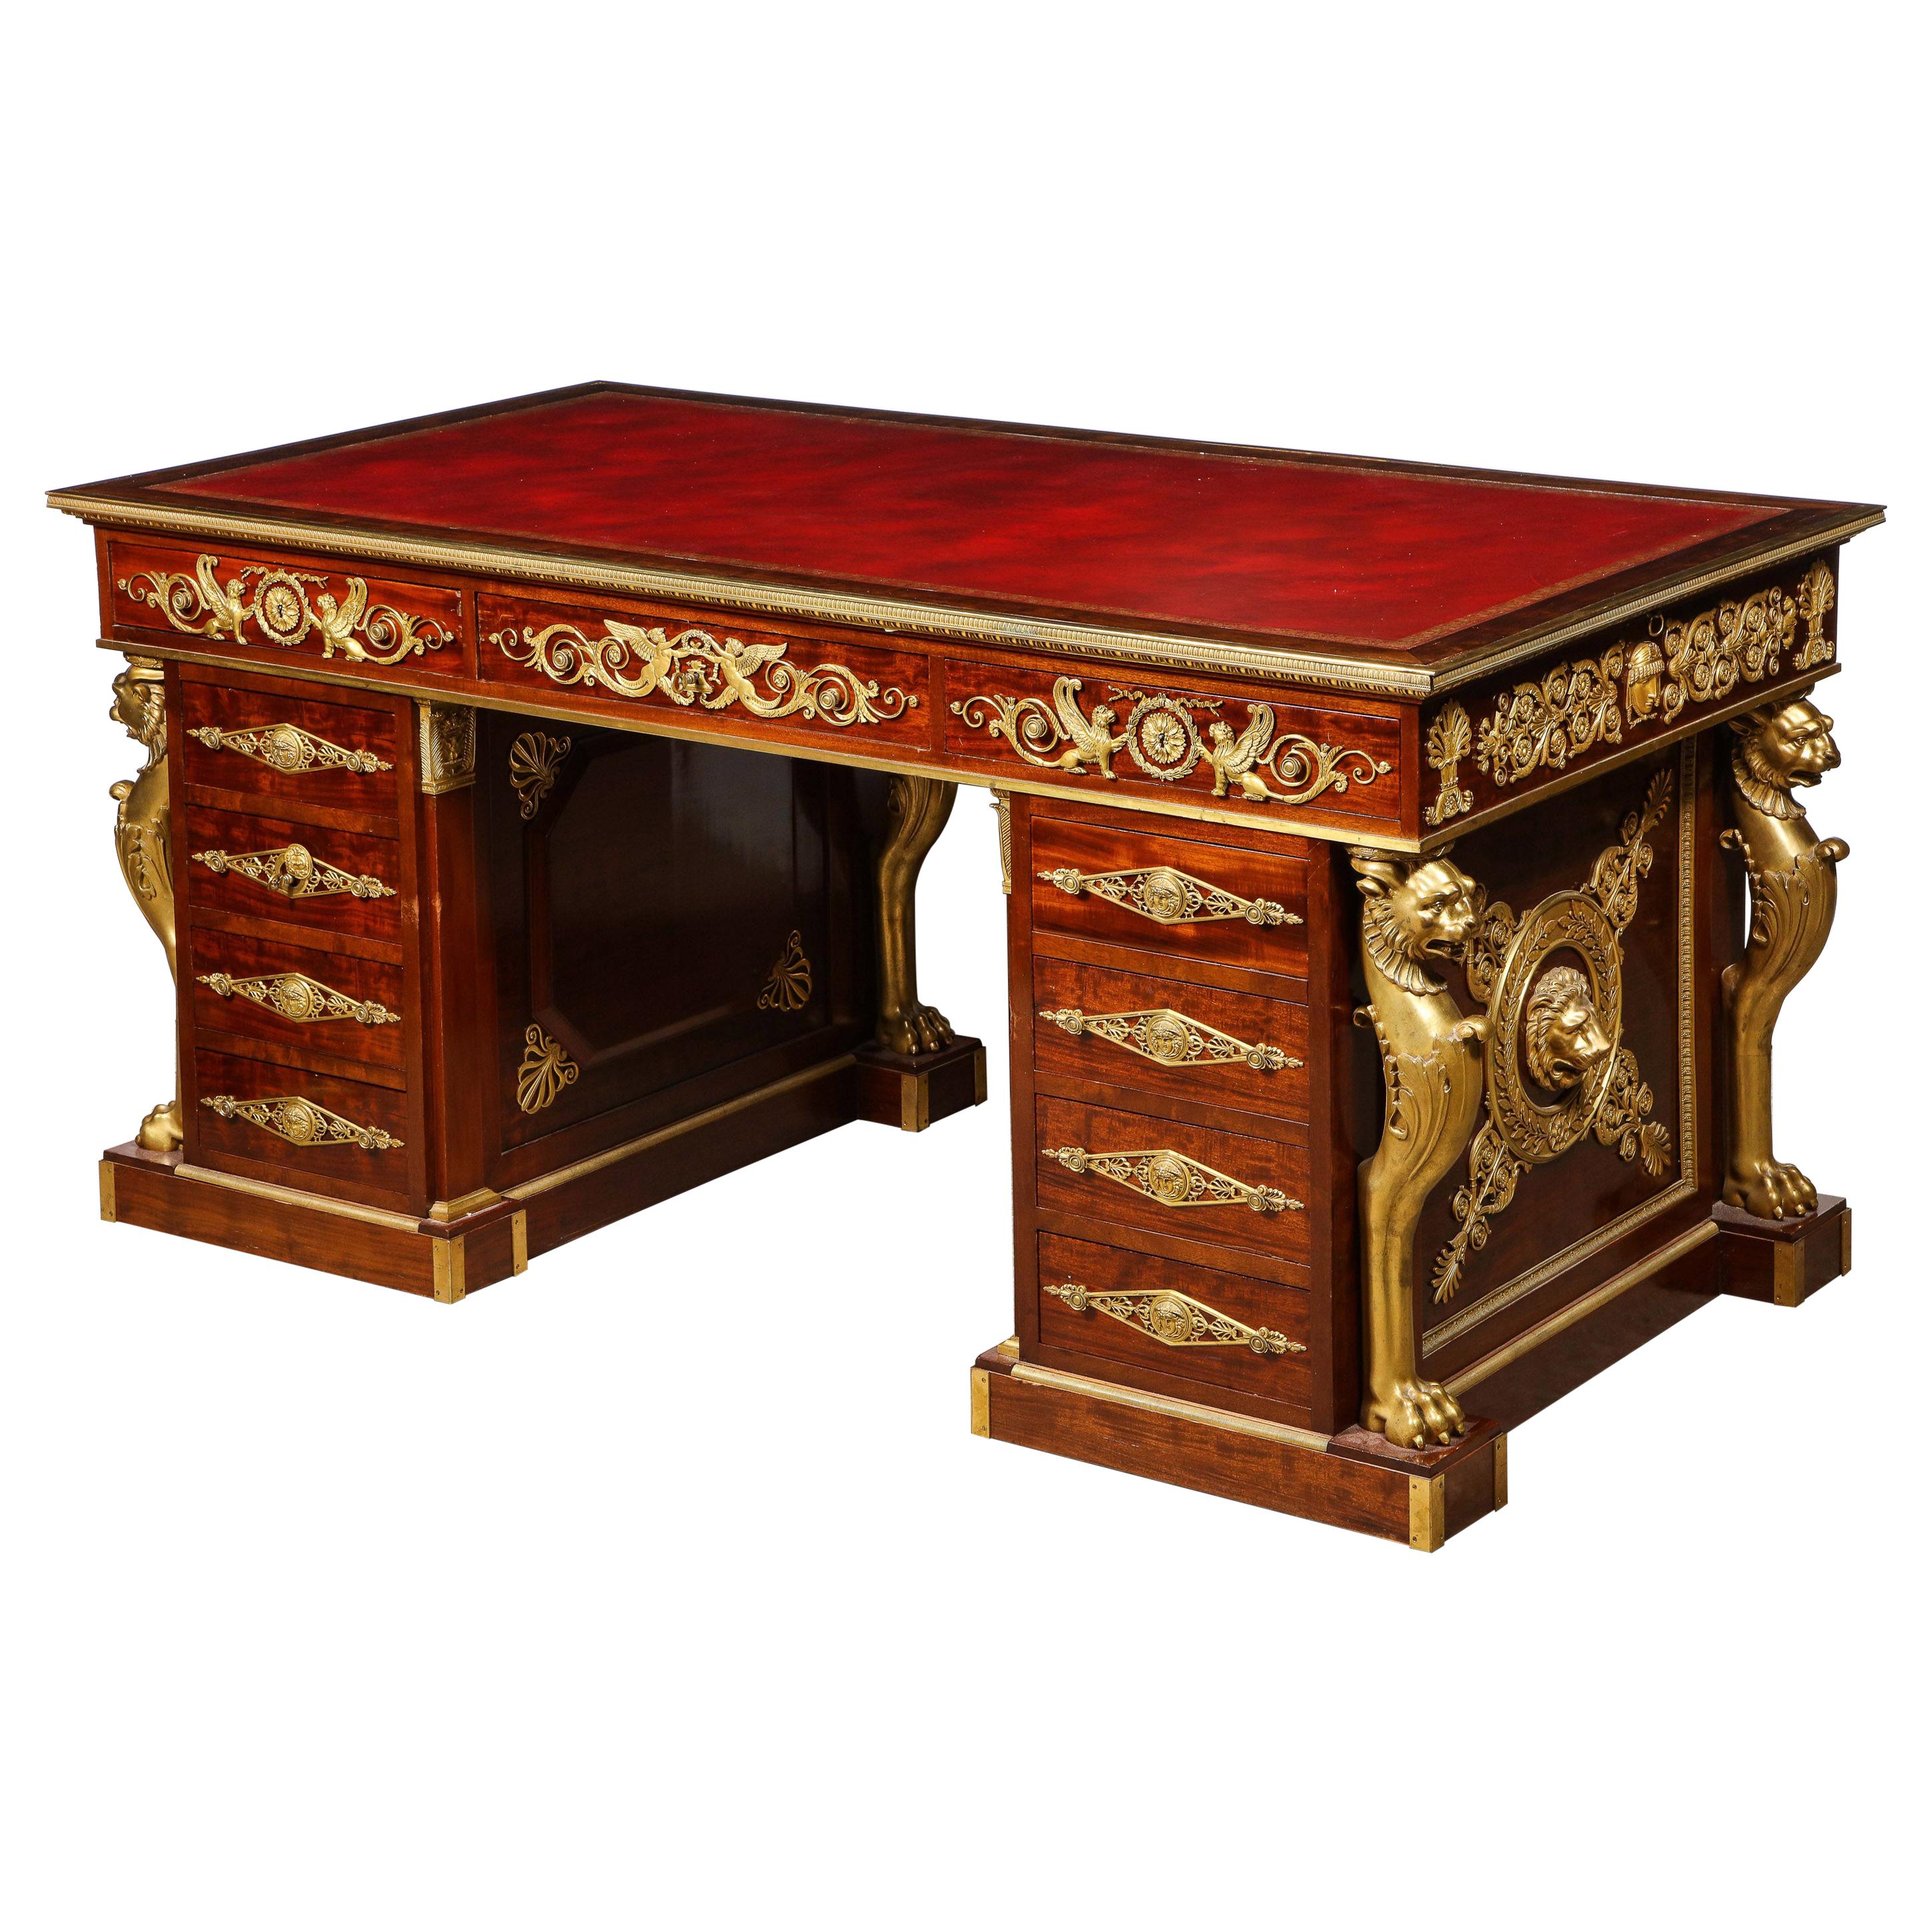 Alexandre Chevrie, Museum French Ormolu Mounted Mahogany Royal Executive Desk For Sale